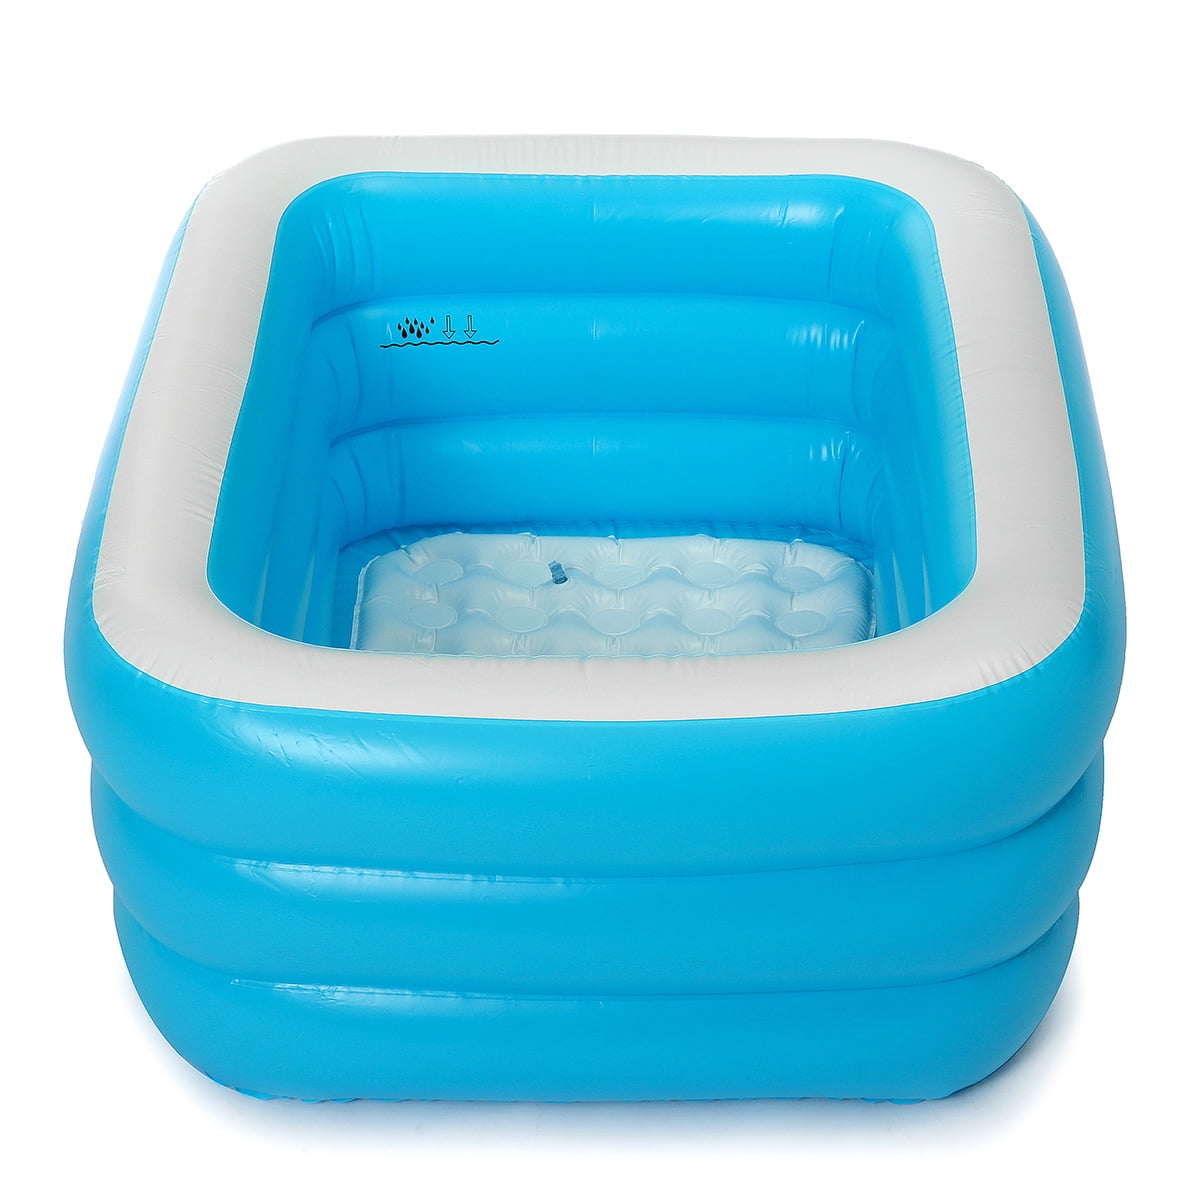 Adults,Toddlers Inflatable Lounge Pool 59.06x41.34x23.6 Family Swimming Pool Outdoor Babies Garden Inflatable Swimming Pools Swim Center for Kids Backyard 